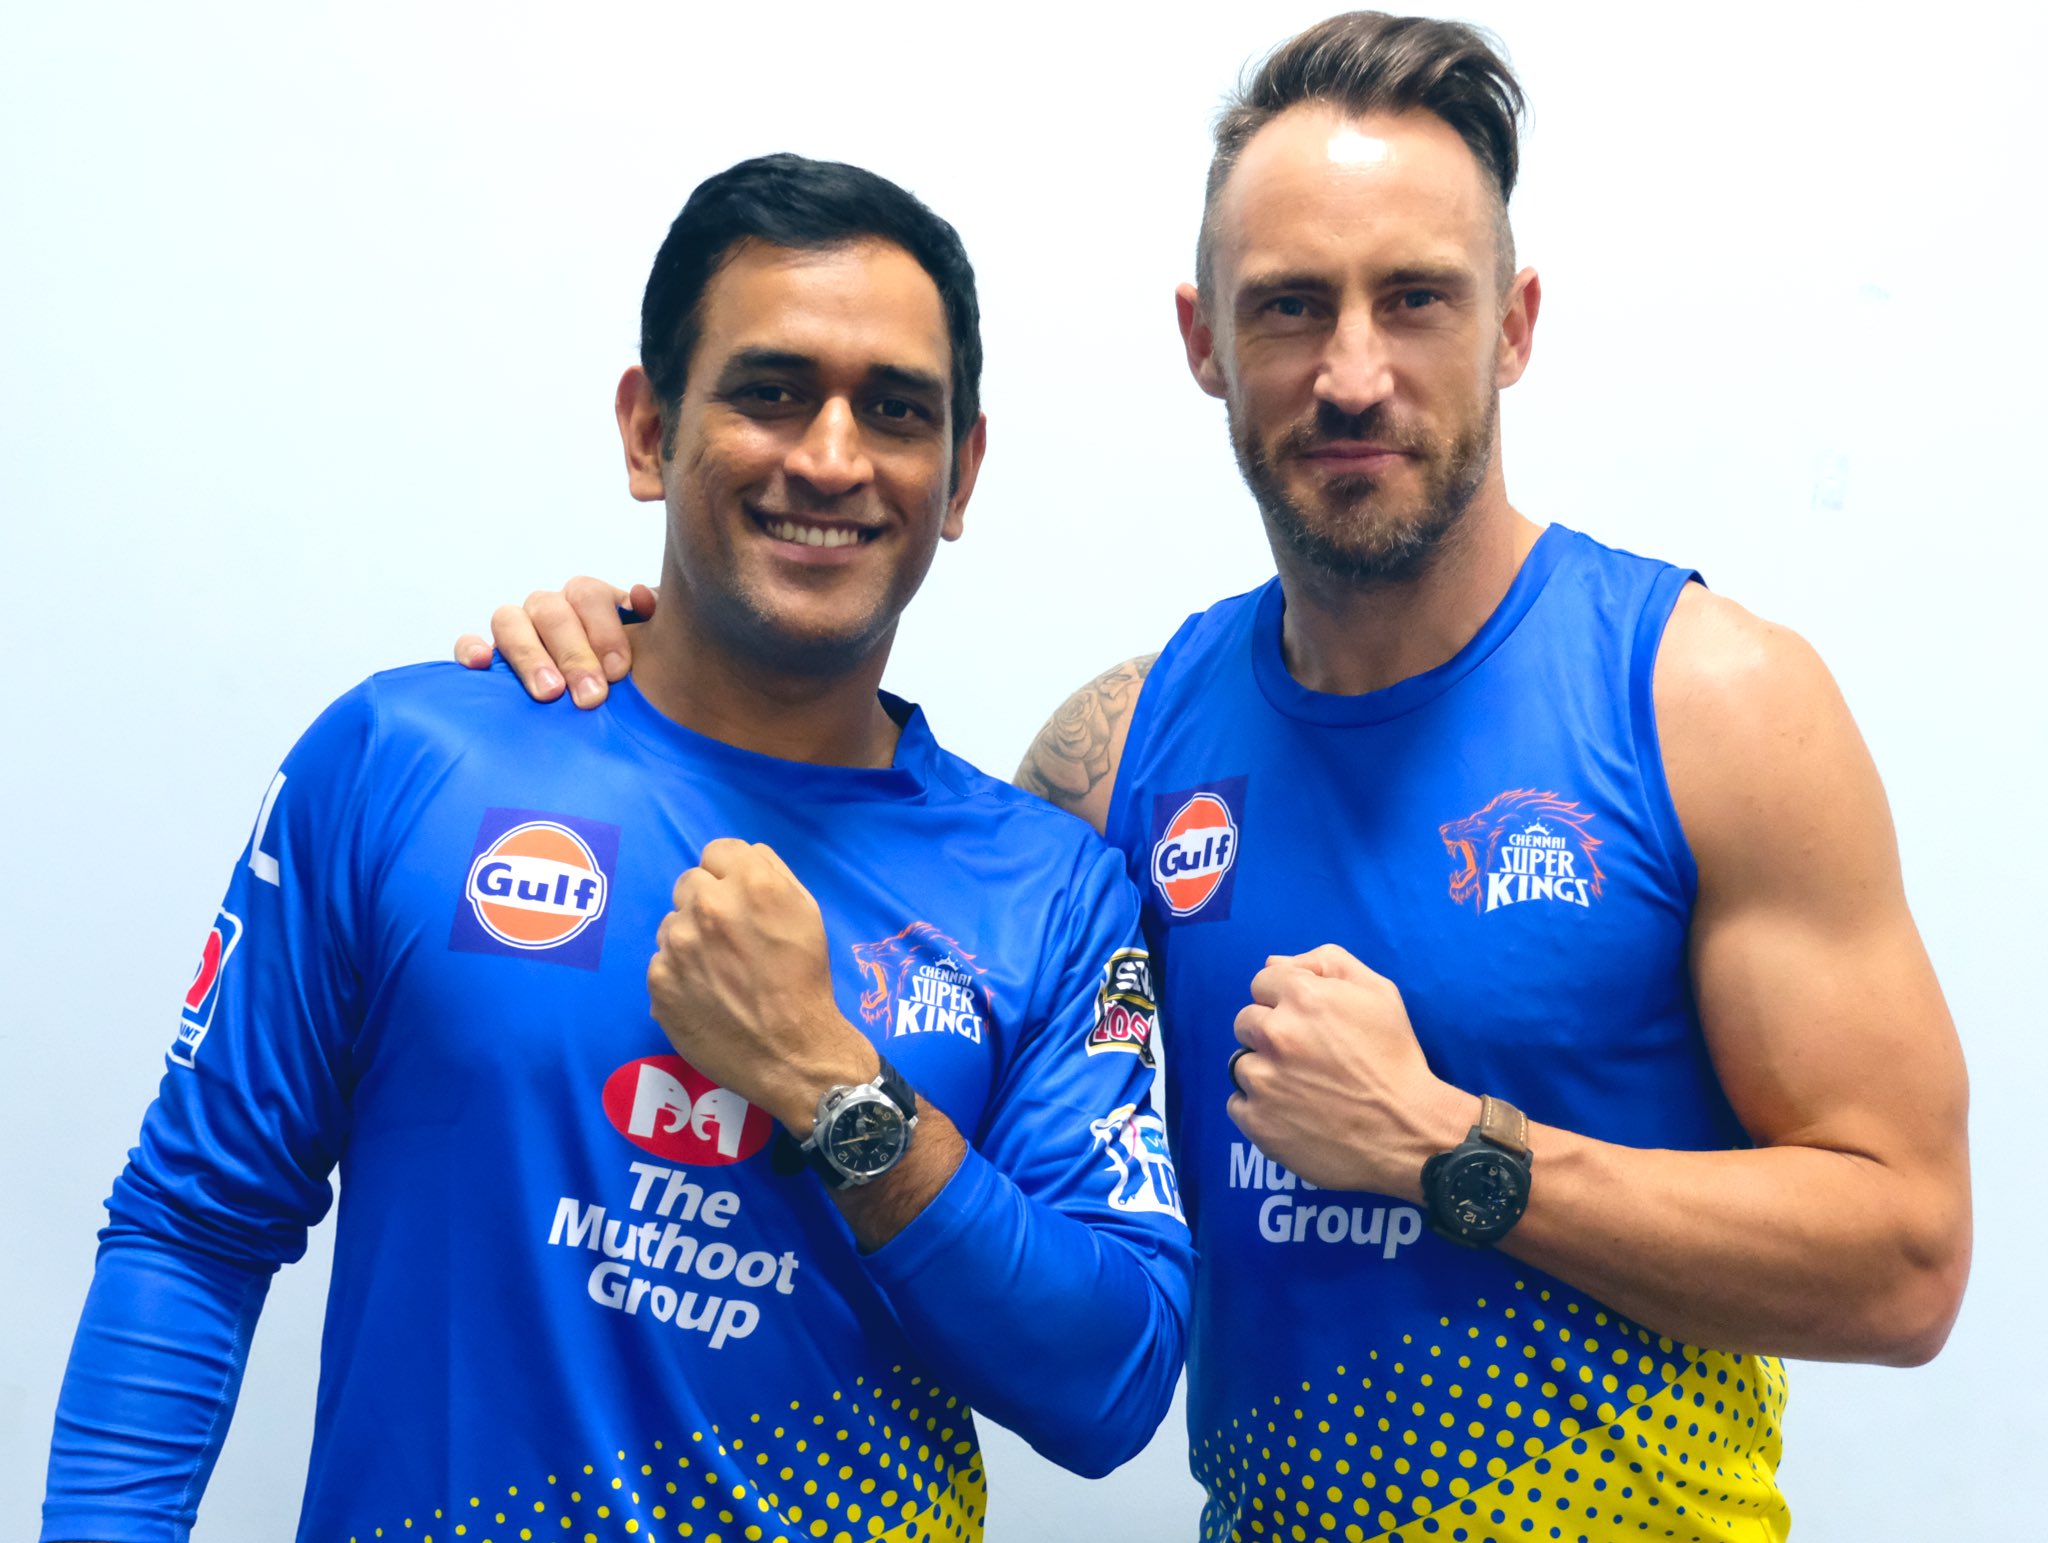 Faf Du Plessis on Twitter: "I've been playing cricket for the same team  with @msdhoni since 2011. We both share a love for @PaneraiOfficial watches  , even long before we became friends